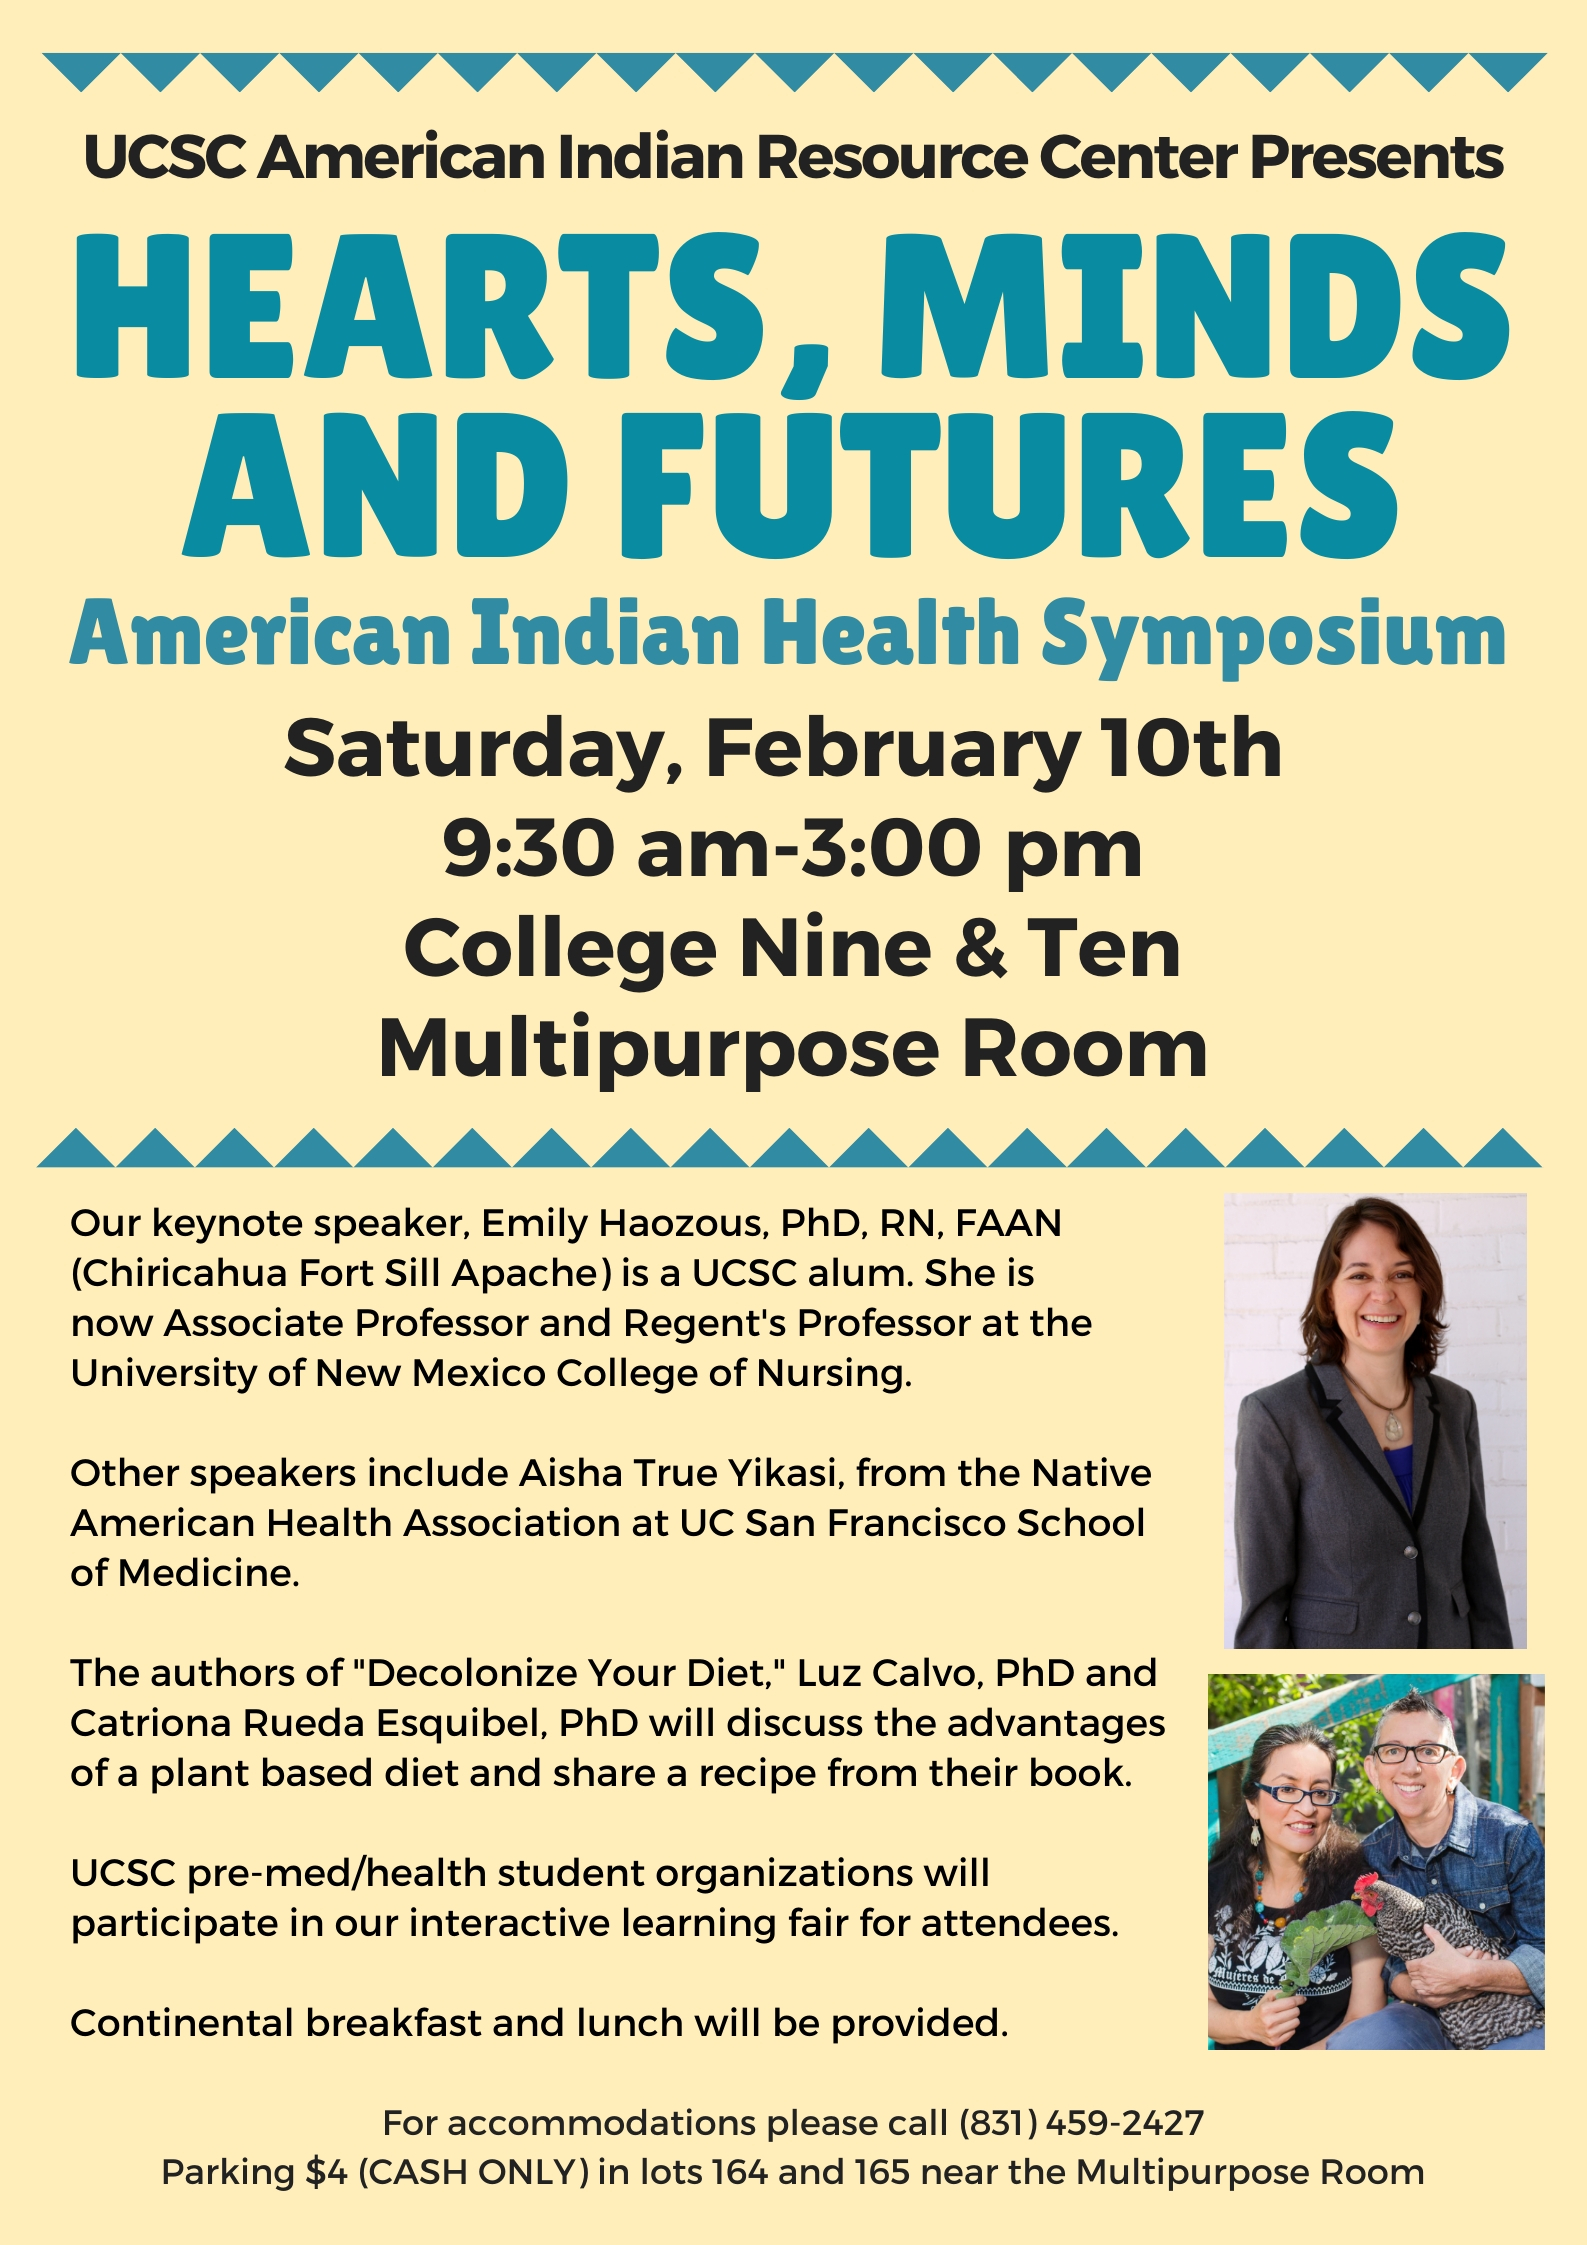 American Indian Health Symposium: Hearts, Minds, and Futures with keynote speaker Dr. Emily Haozous 